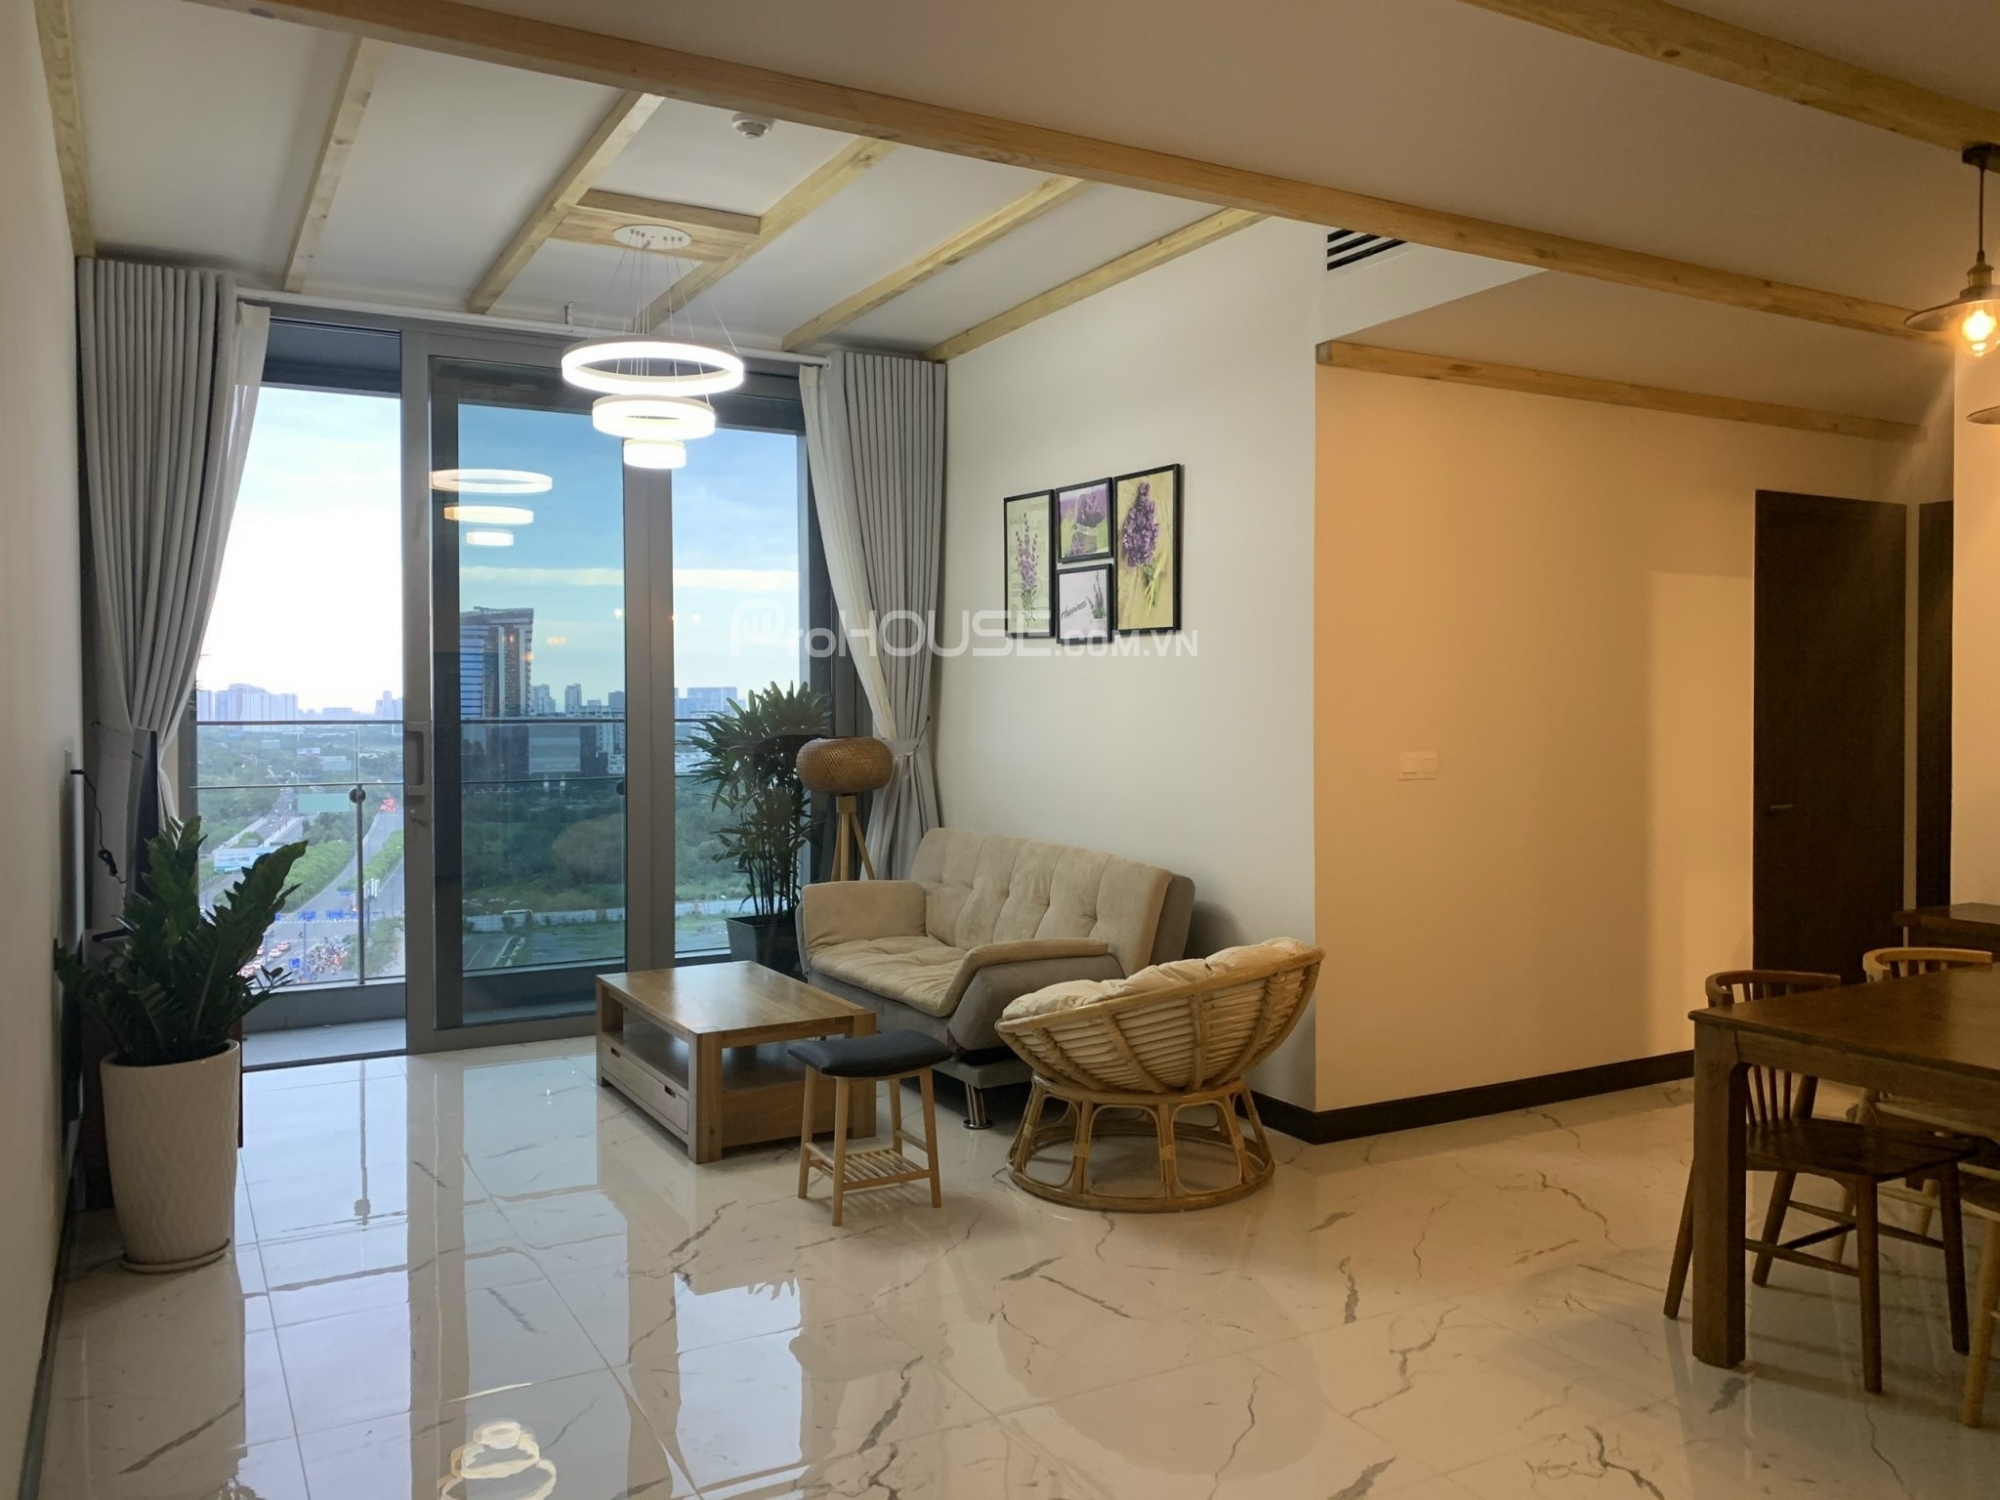 Open view 2 bedroom apartment for rent in Empire City with full furniture